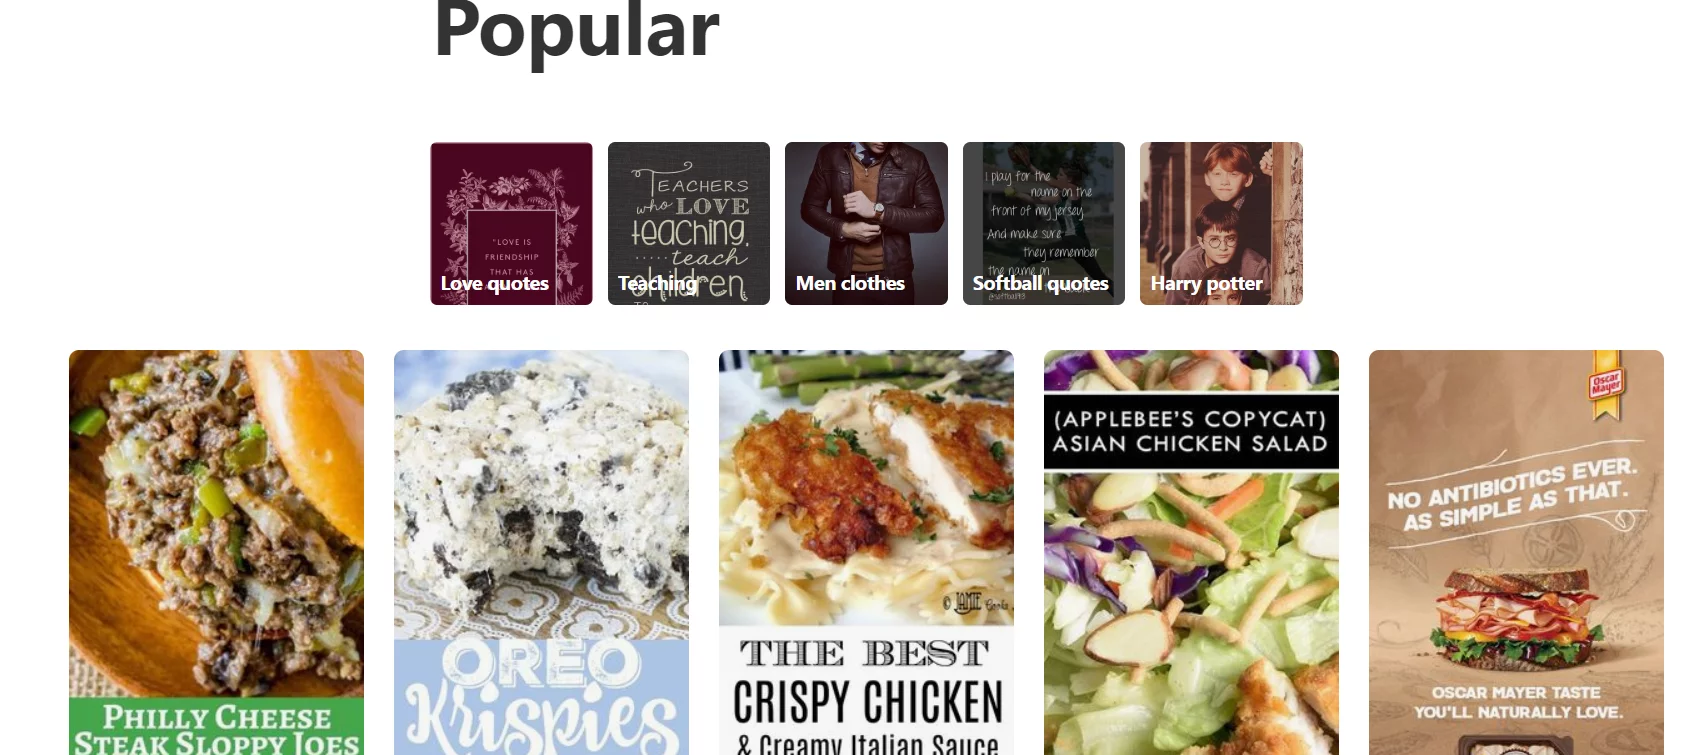 The "Popular" section will show you some of the most popular pins on Pinterest